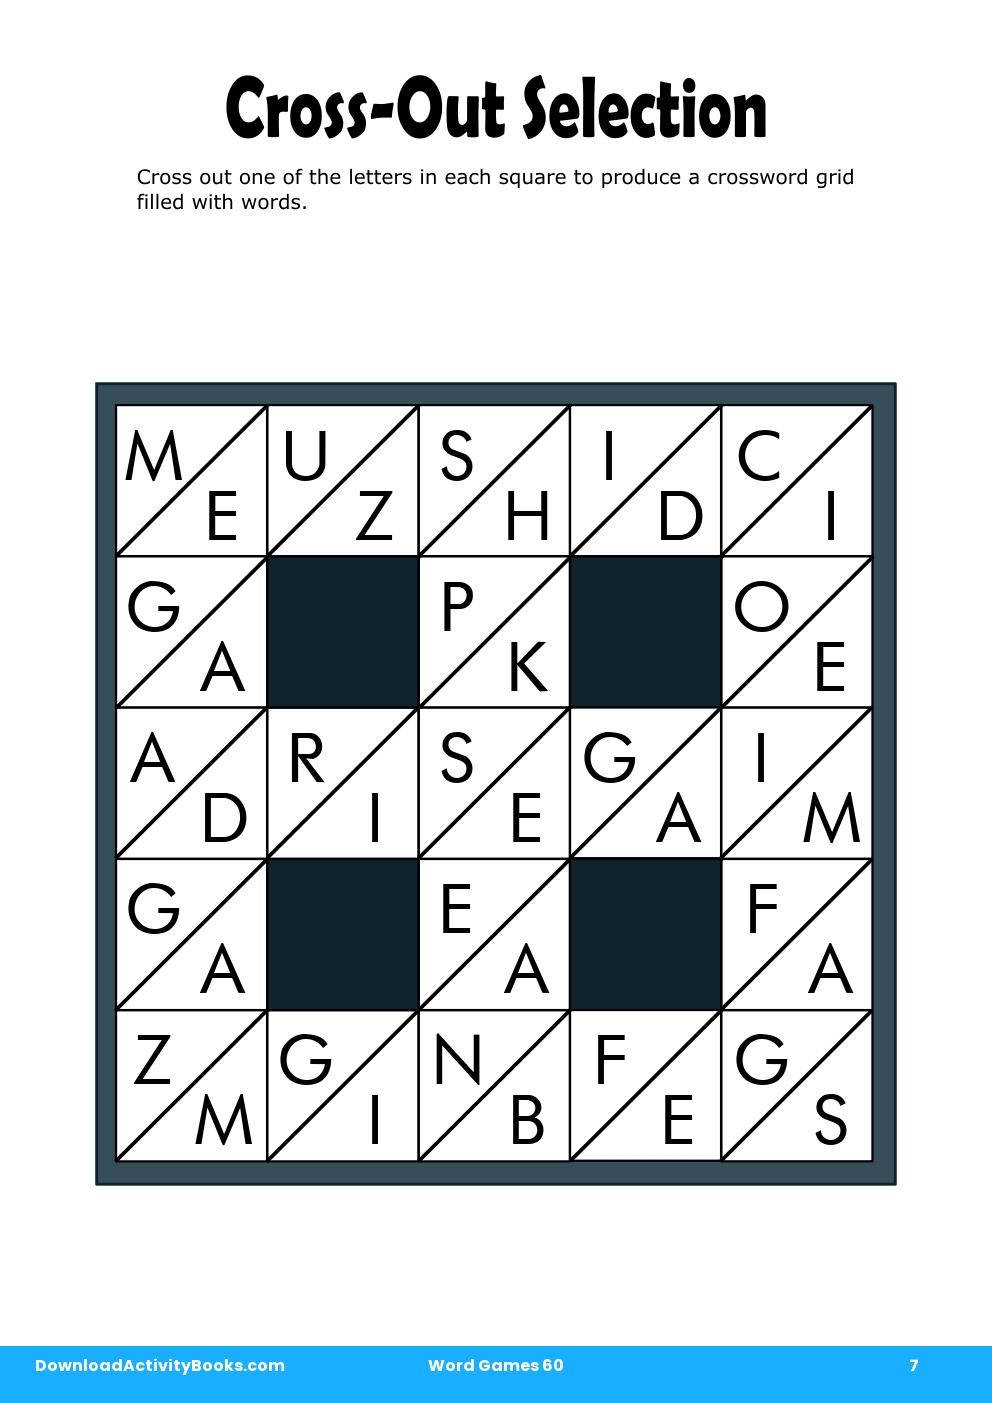 Cross-Out Selection in Word Games 60